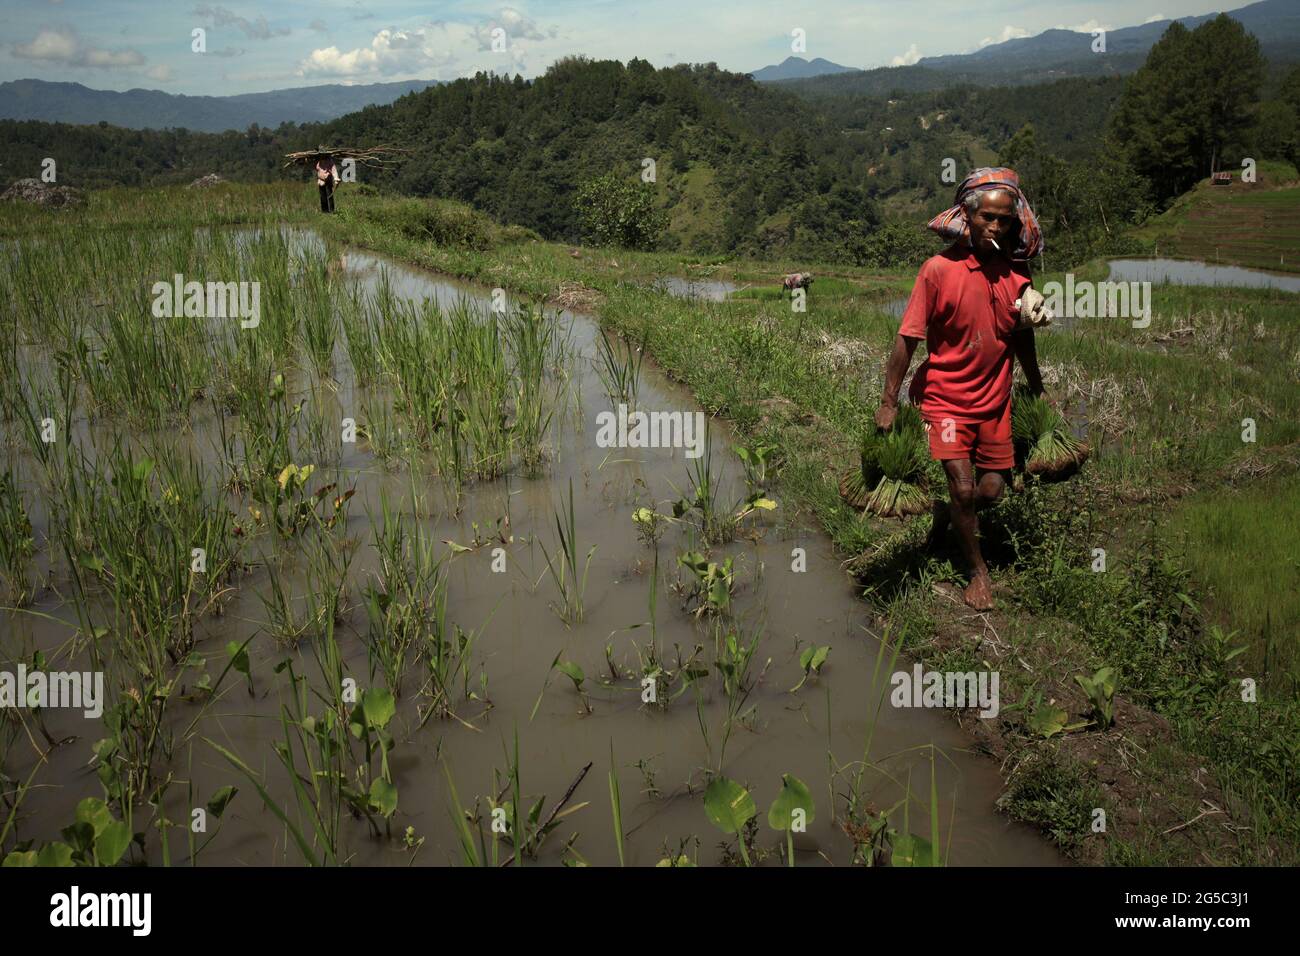 A rice farmer carrying bunches of young rice plants, walking on embankment through rice fields on a bright day, near Kurra, Tana Toraja, South Sulawesi, Indonesia. Higher temperatures caused by global warming are projected to reduce rice crop yields in Indonesia. Changes in El Nino patterns, that impact the onset and length of the wet season, are also sending agricultural production to a vulnerable status. Developing new, or improved local rice varieties that more resilient--echoing recent studies in other countries--could be one of the keys to mitigate. Stock Photo